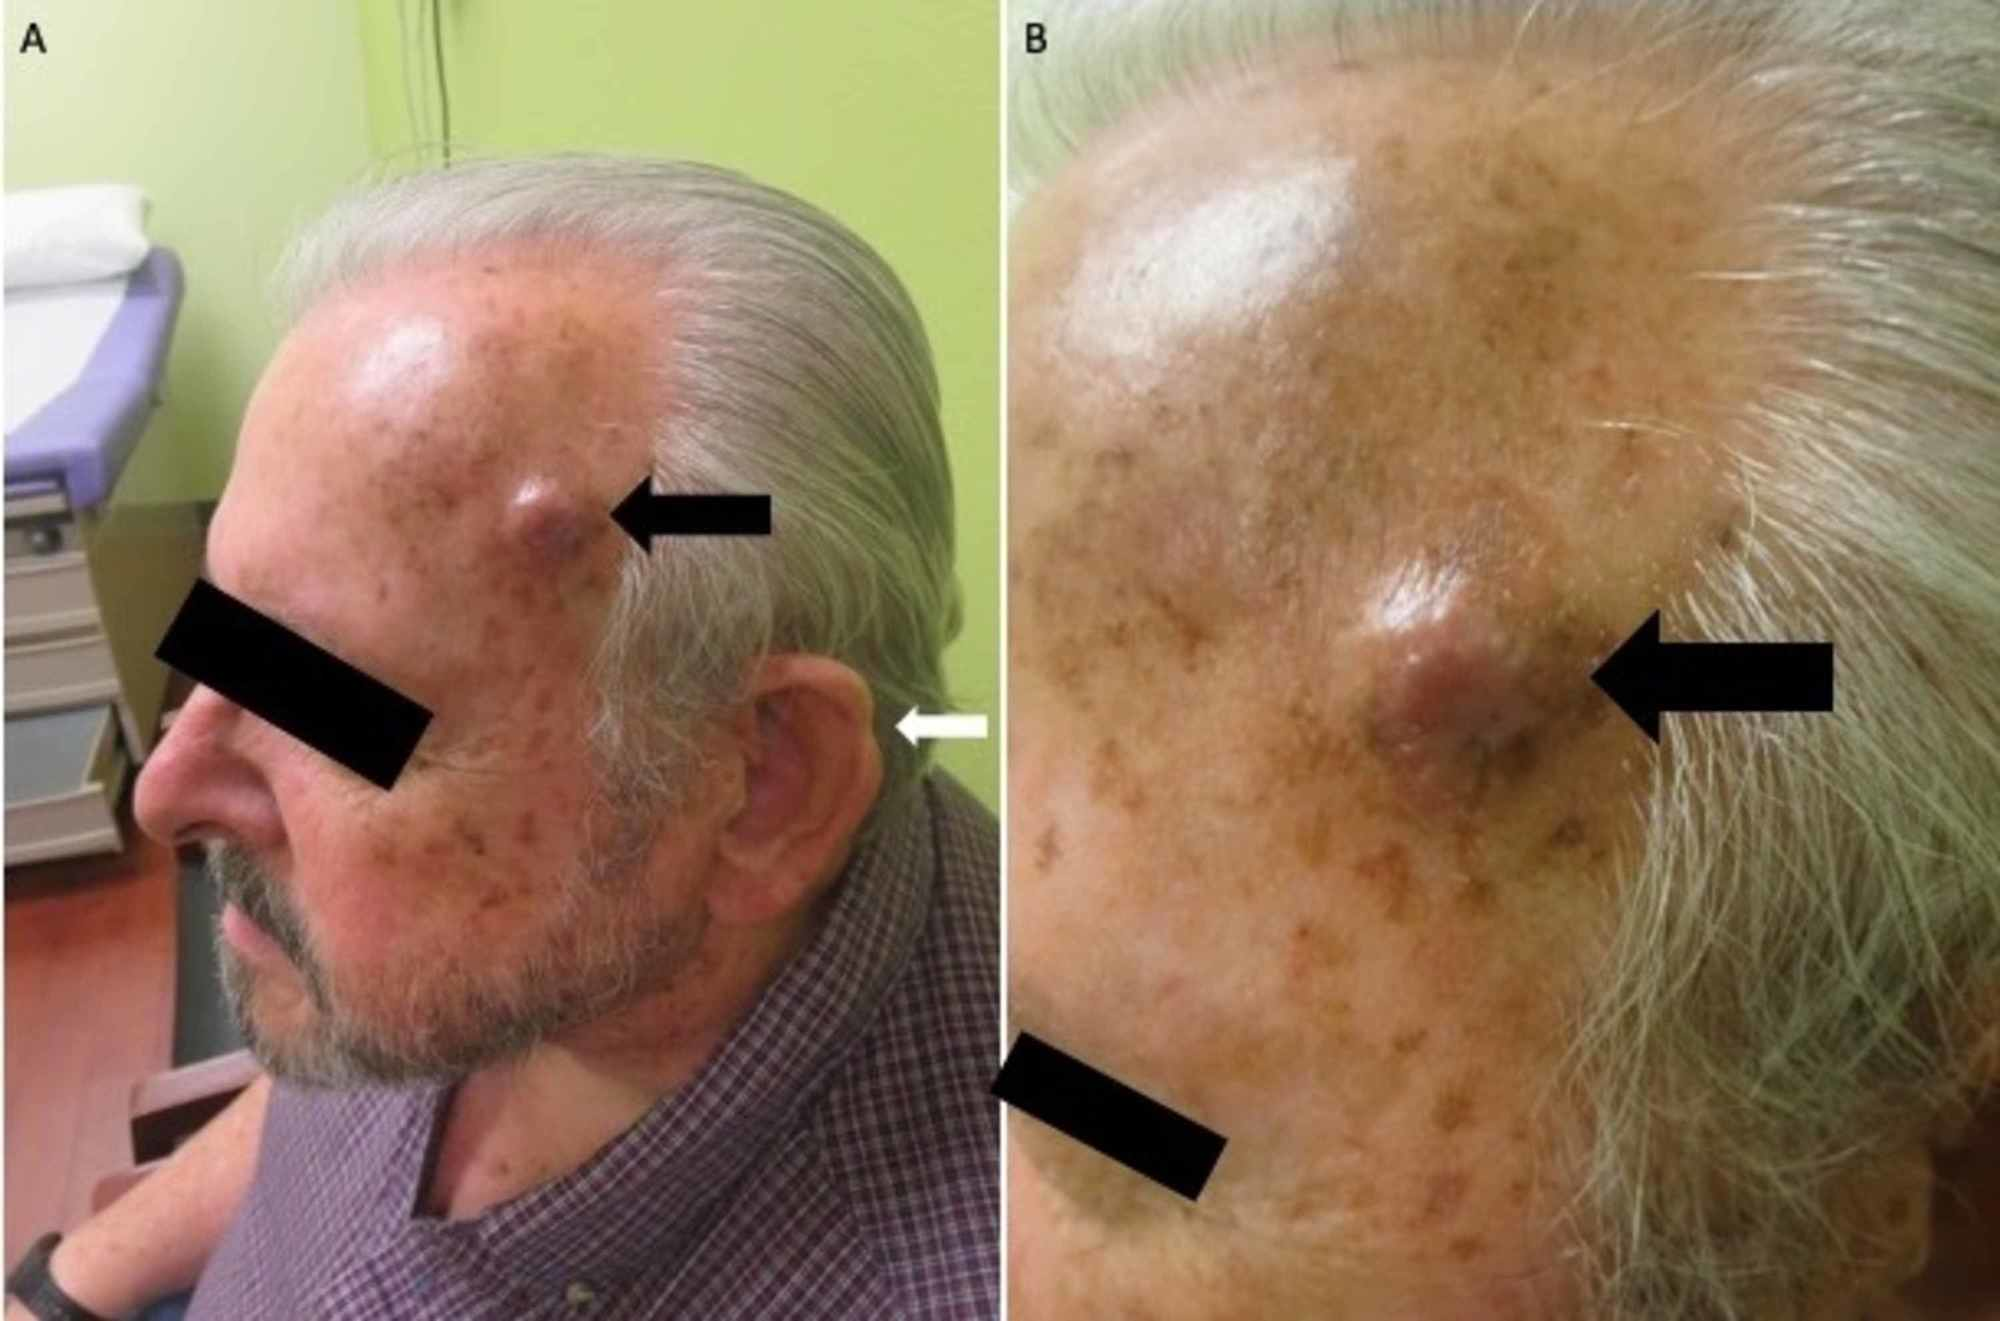 Cureus Metastatic Squamous Cell Carcinoma A Cautionary Tale